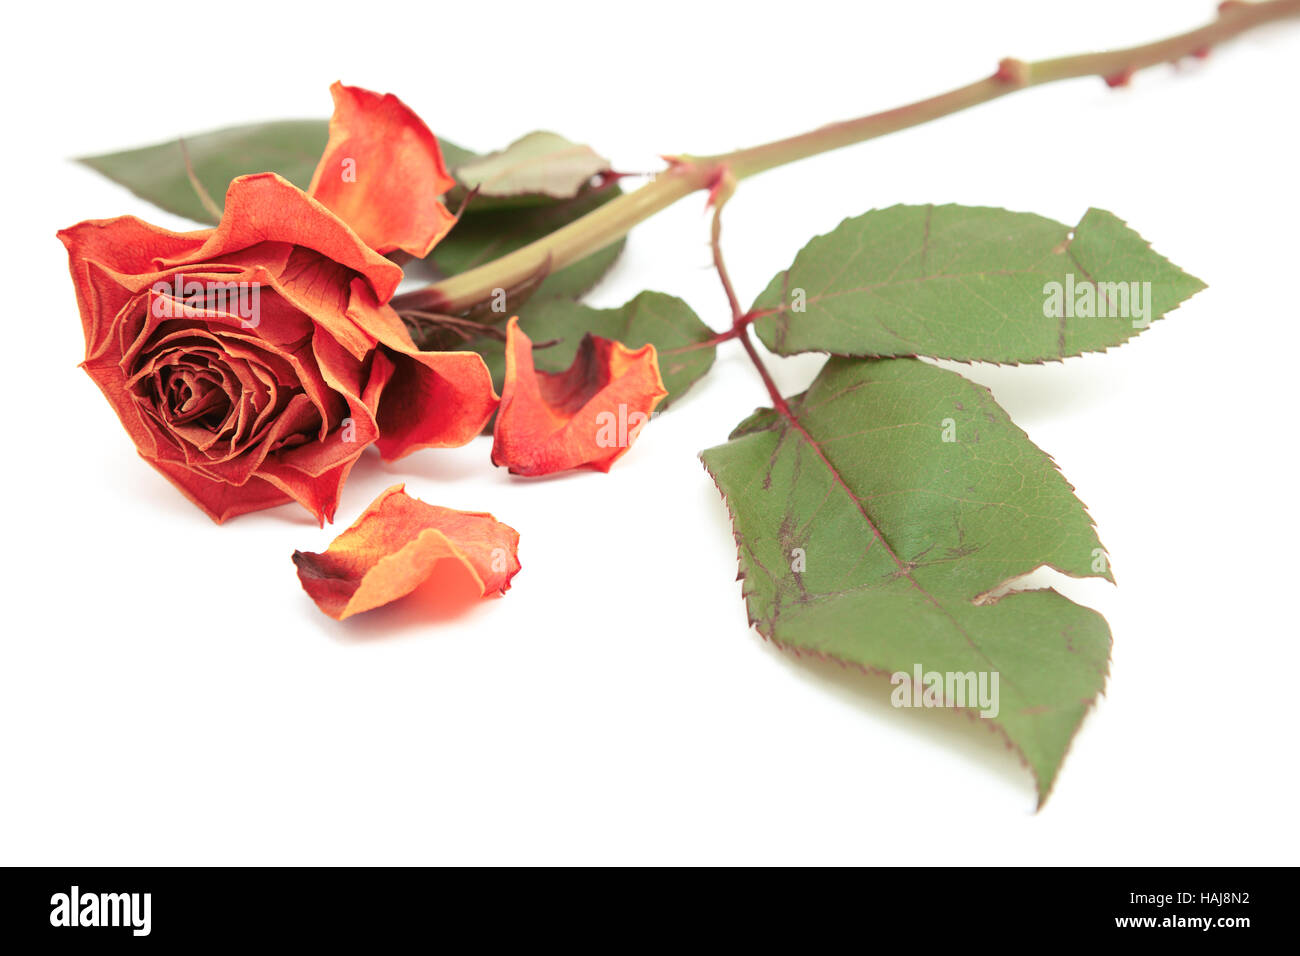 Dying pink rose bloom with dropped petals and a long stem on a white background Stock Photo